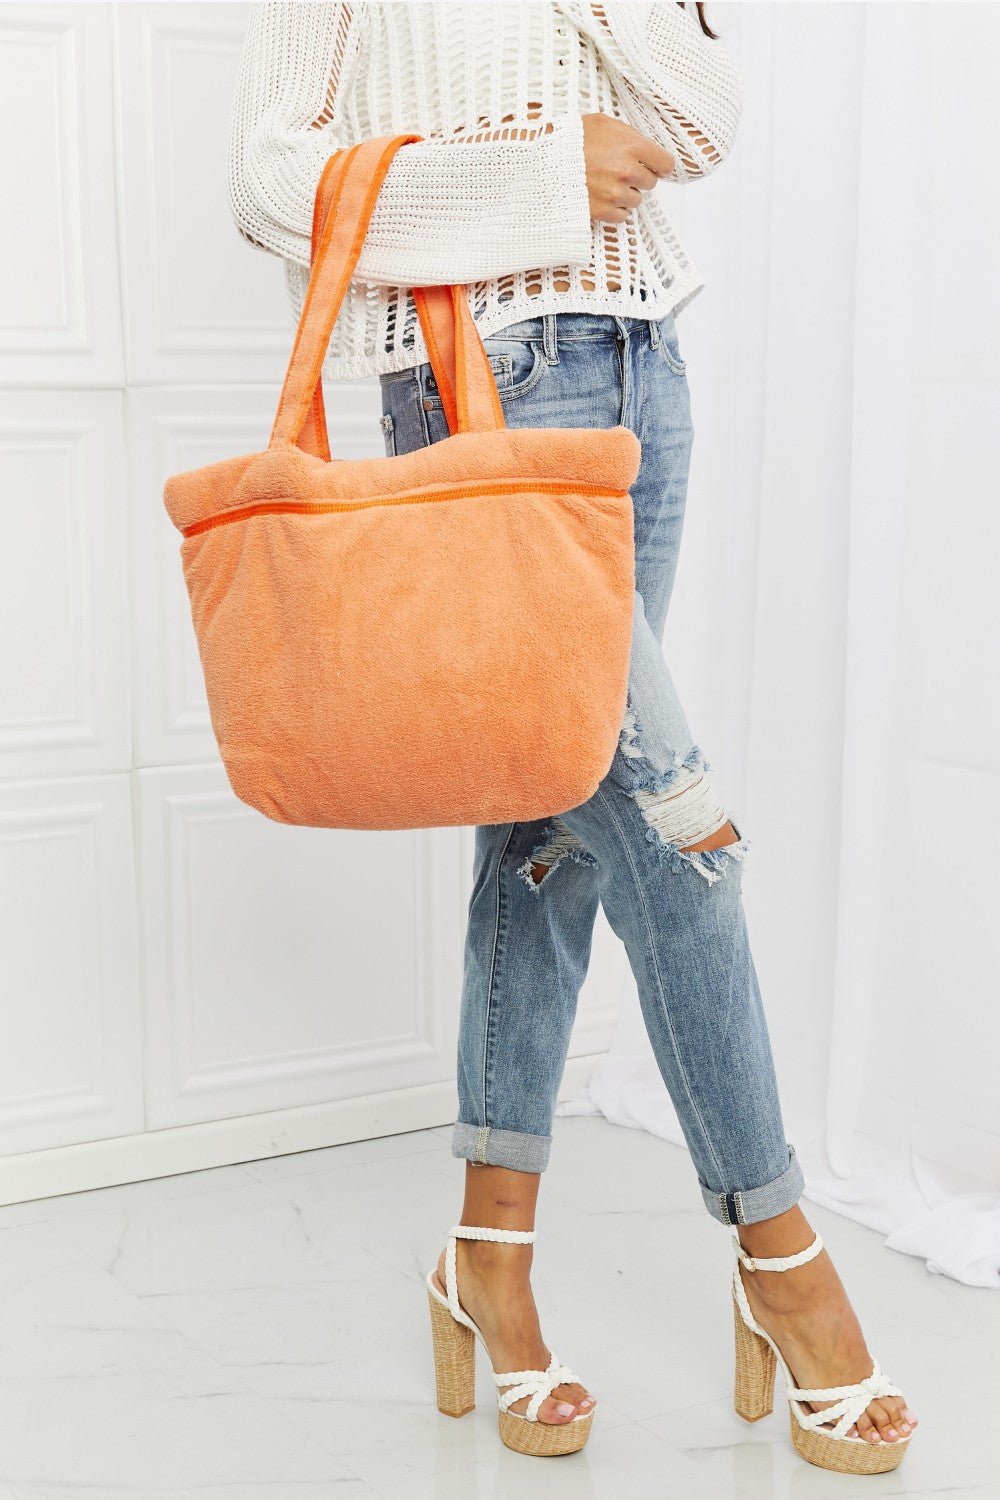 Terry Cloth Tote Bag in TangerineTote BagFame